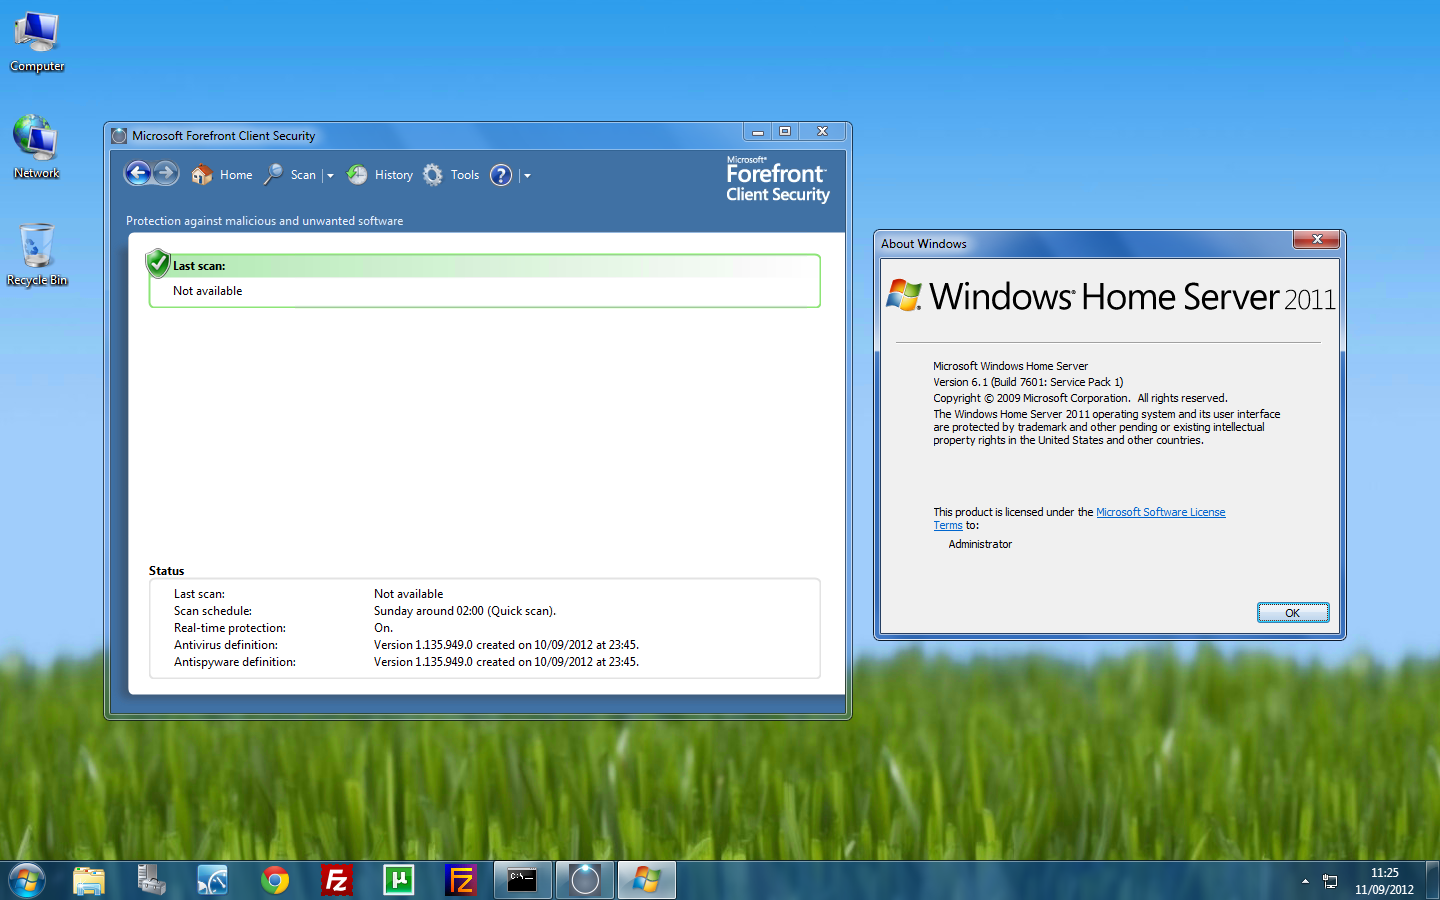 Forefront Security on Windows Home Server 2011